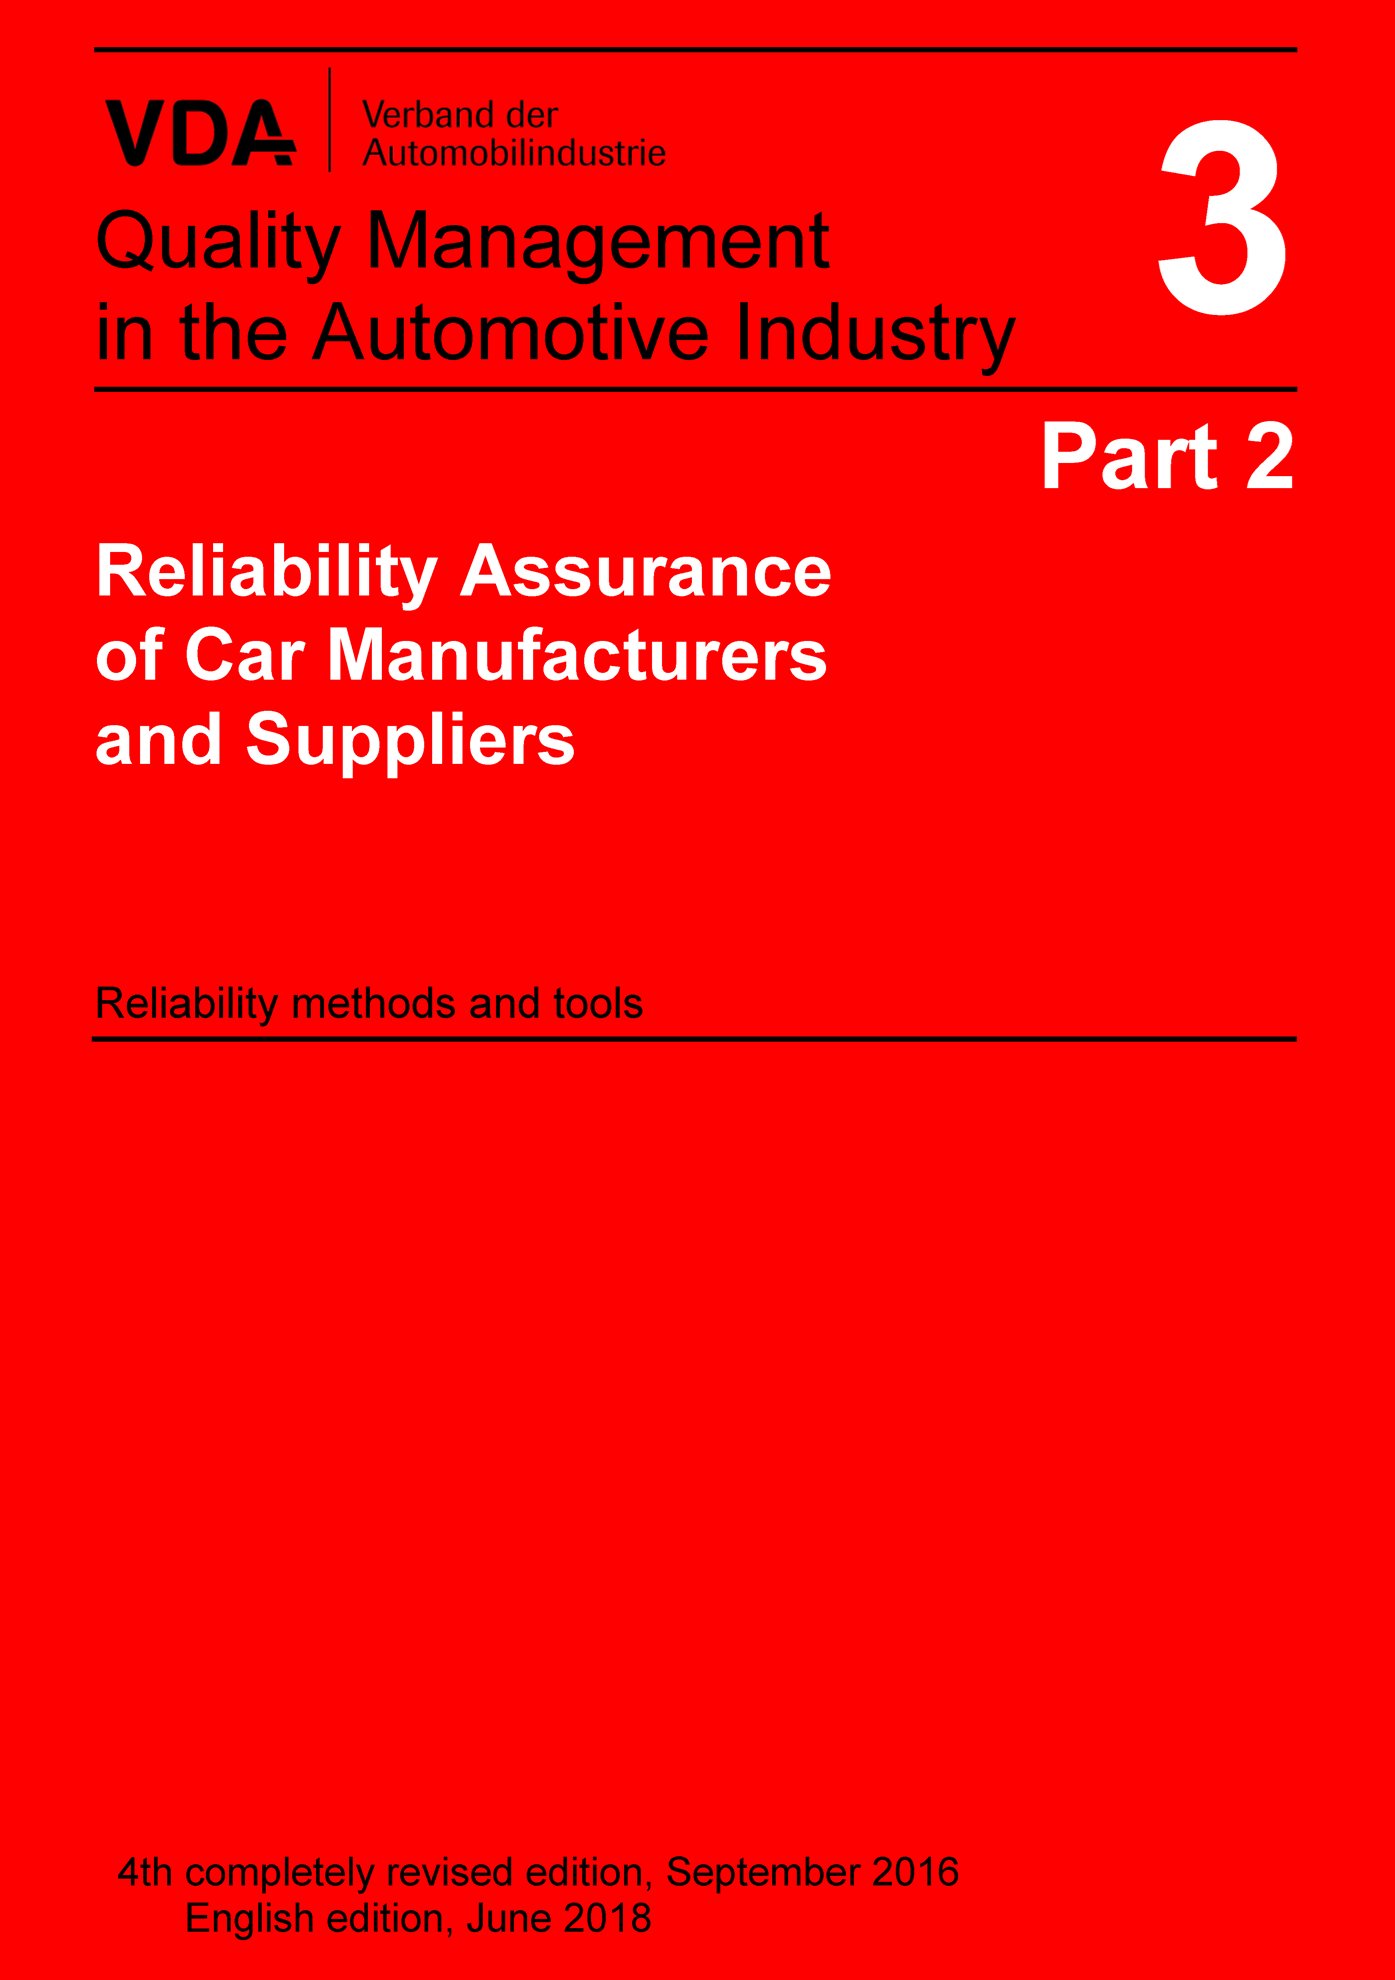 Publikace  VDA Volume 3 Part 2, 4th completely revised edition 2016 Reliability Assurance of Car Manufacturers and Suppliers 
 Reliability methods and tools 1.1.2016 náhled